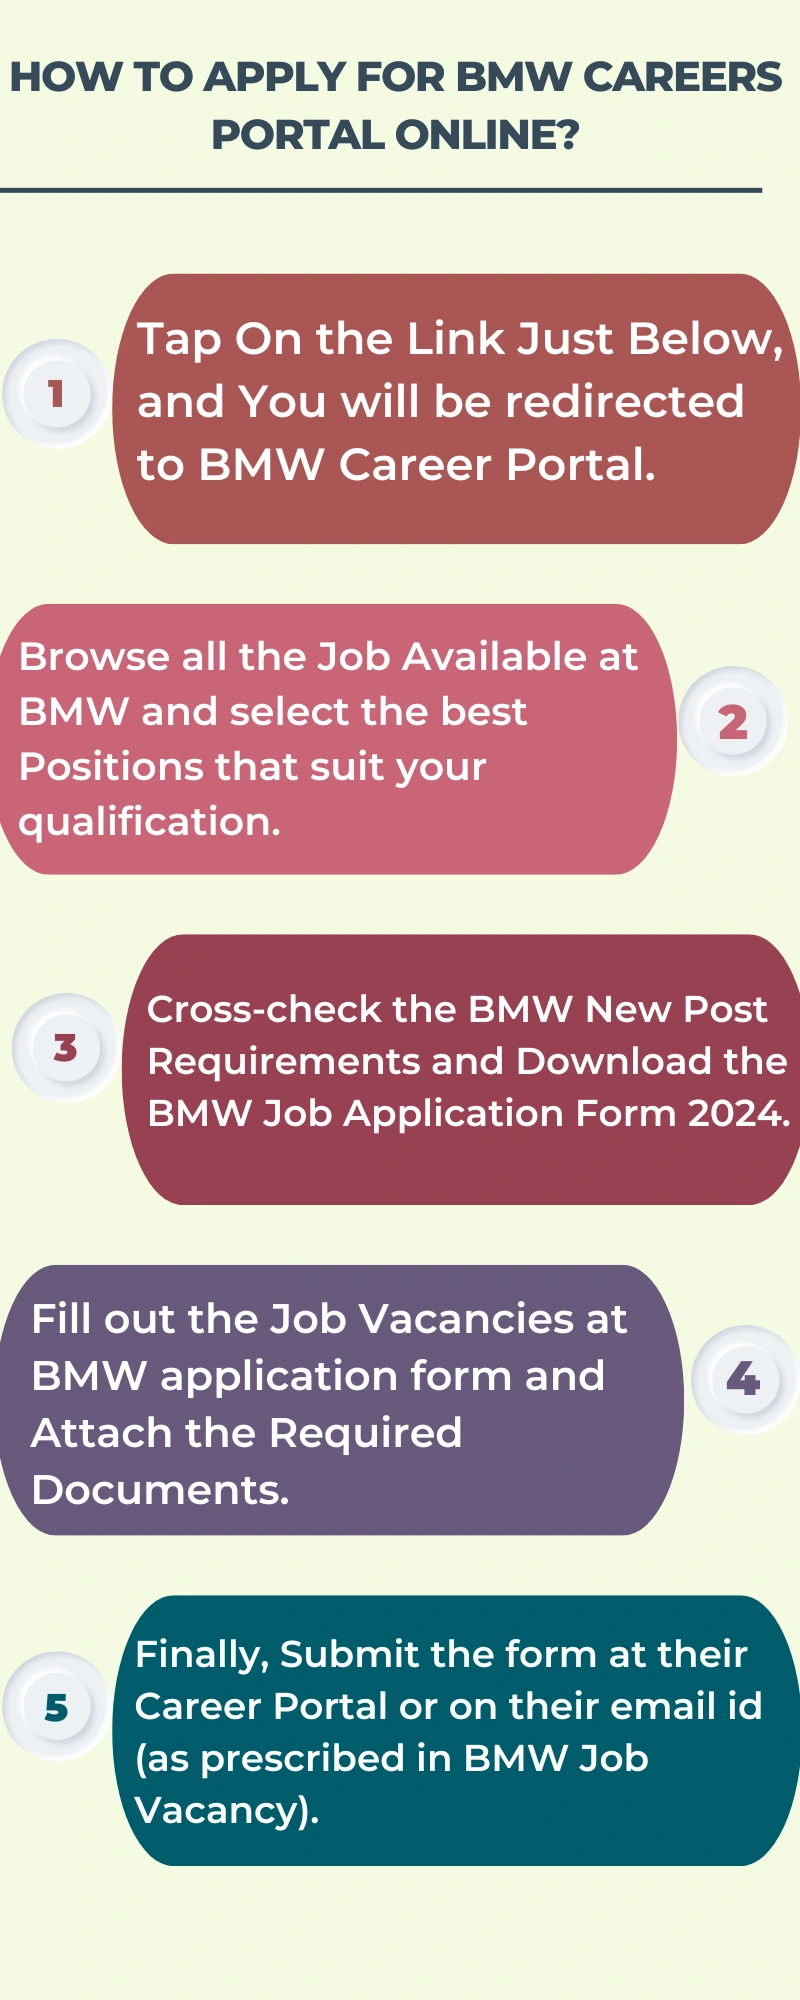 How To Apply for BMW Careers Portal Online?